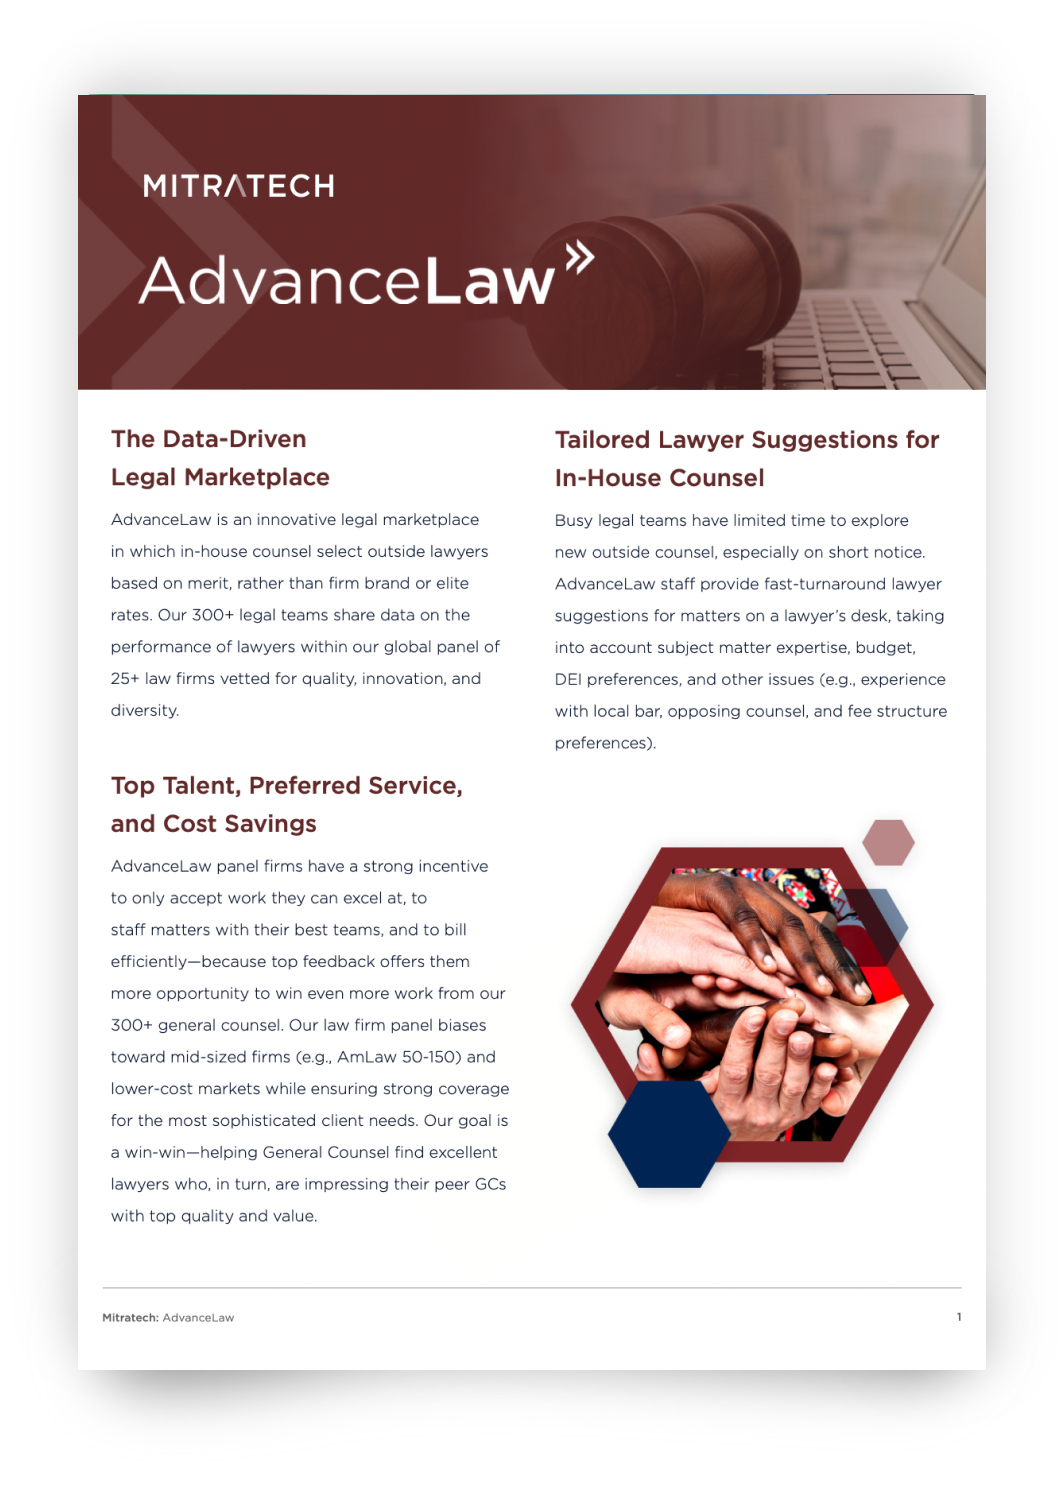 Reimagining Firm & Panel Management with Mitratech’s AdvanceLaw